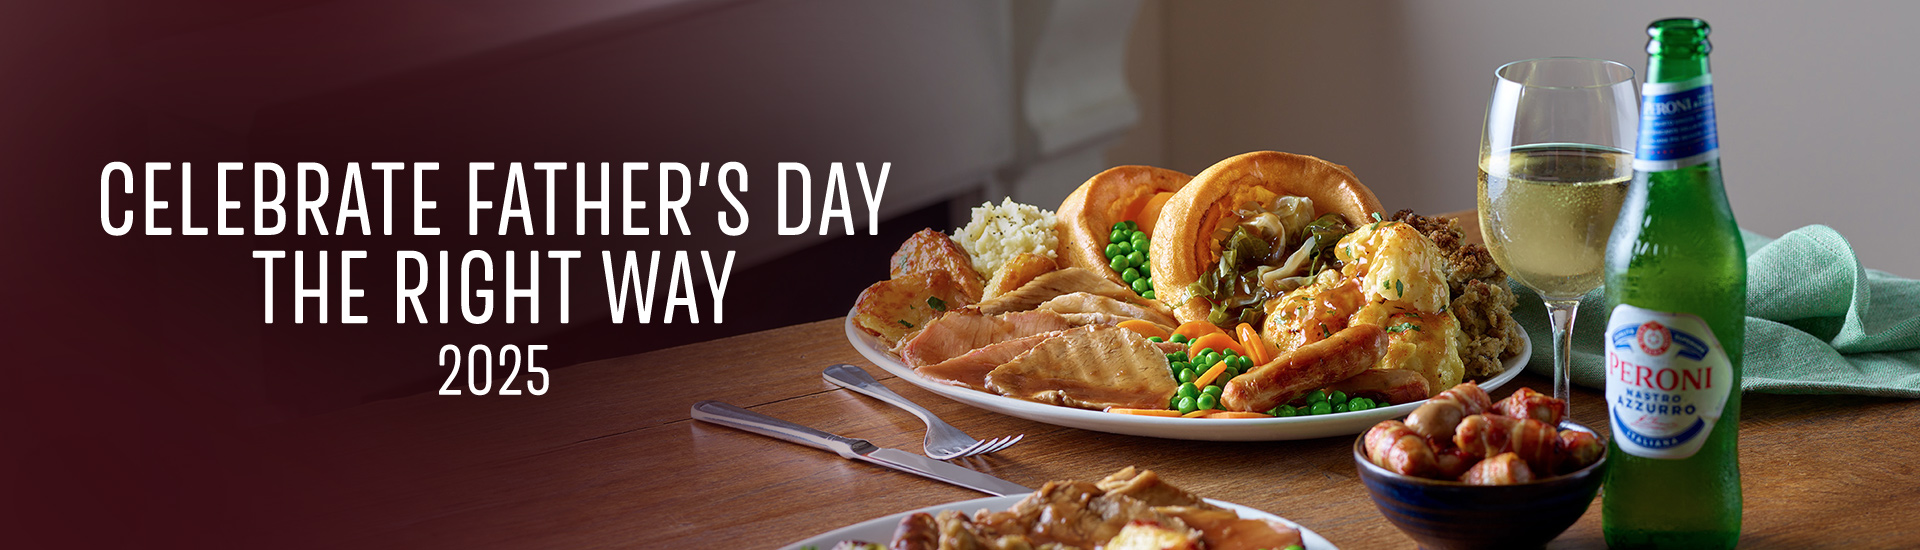 Father’s day carvery in Macclesfield